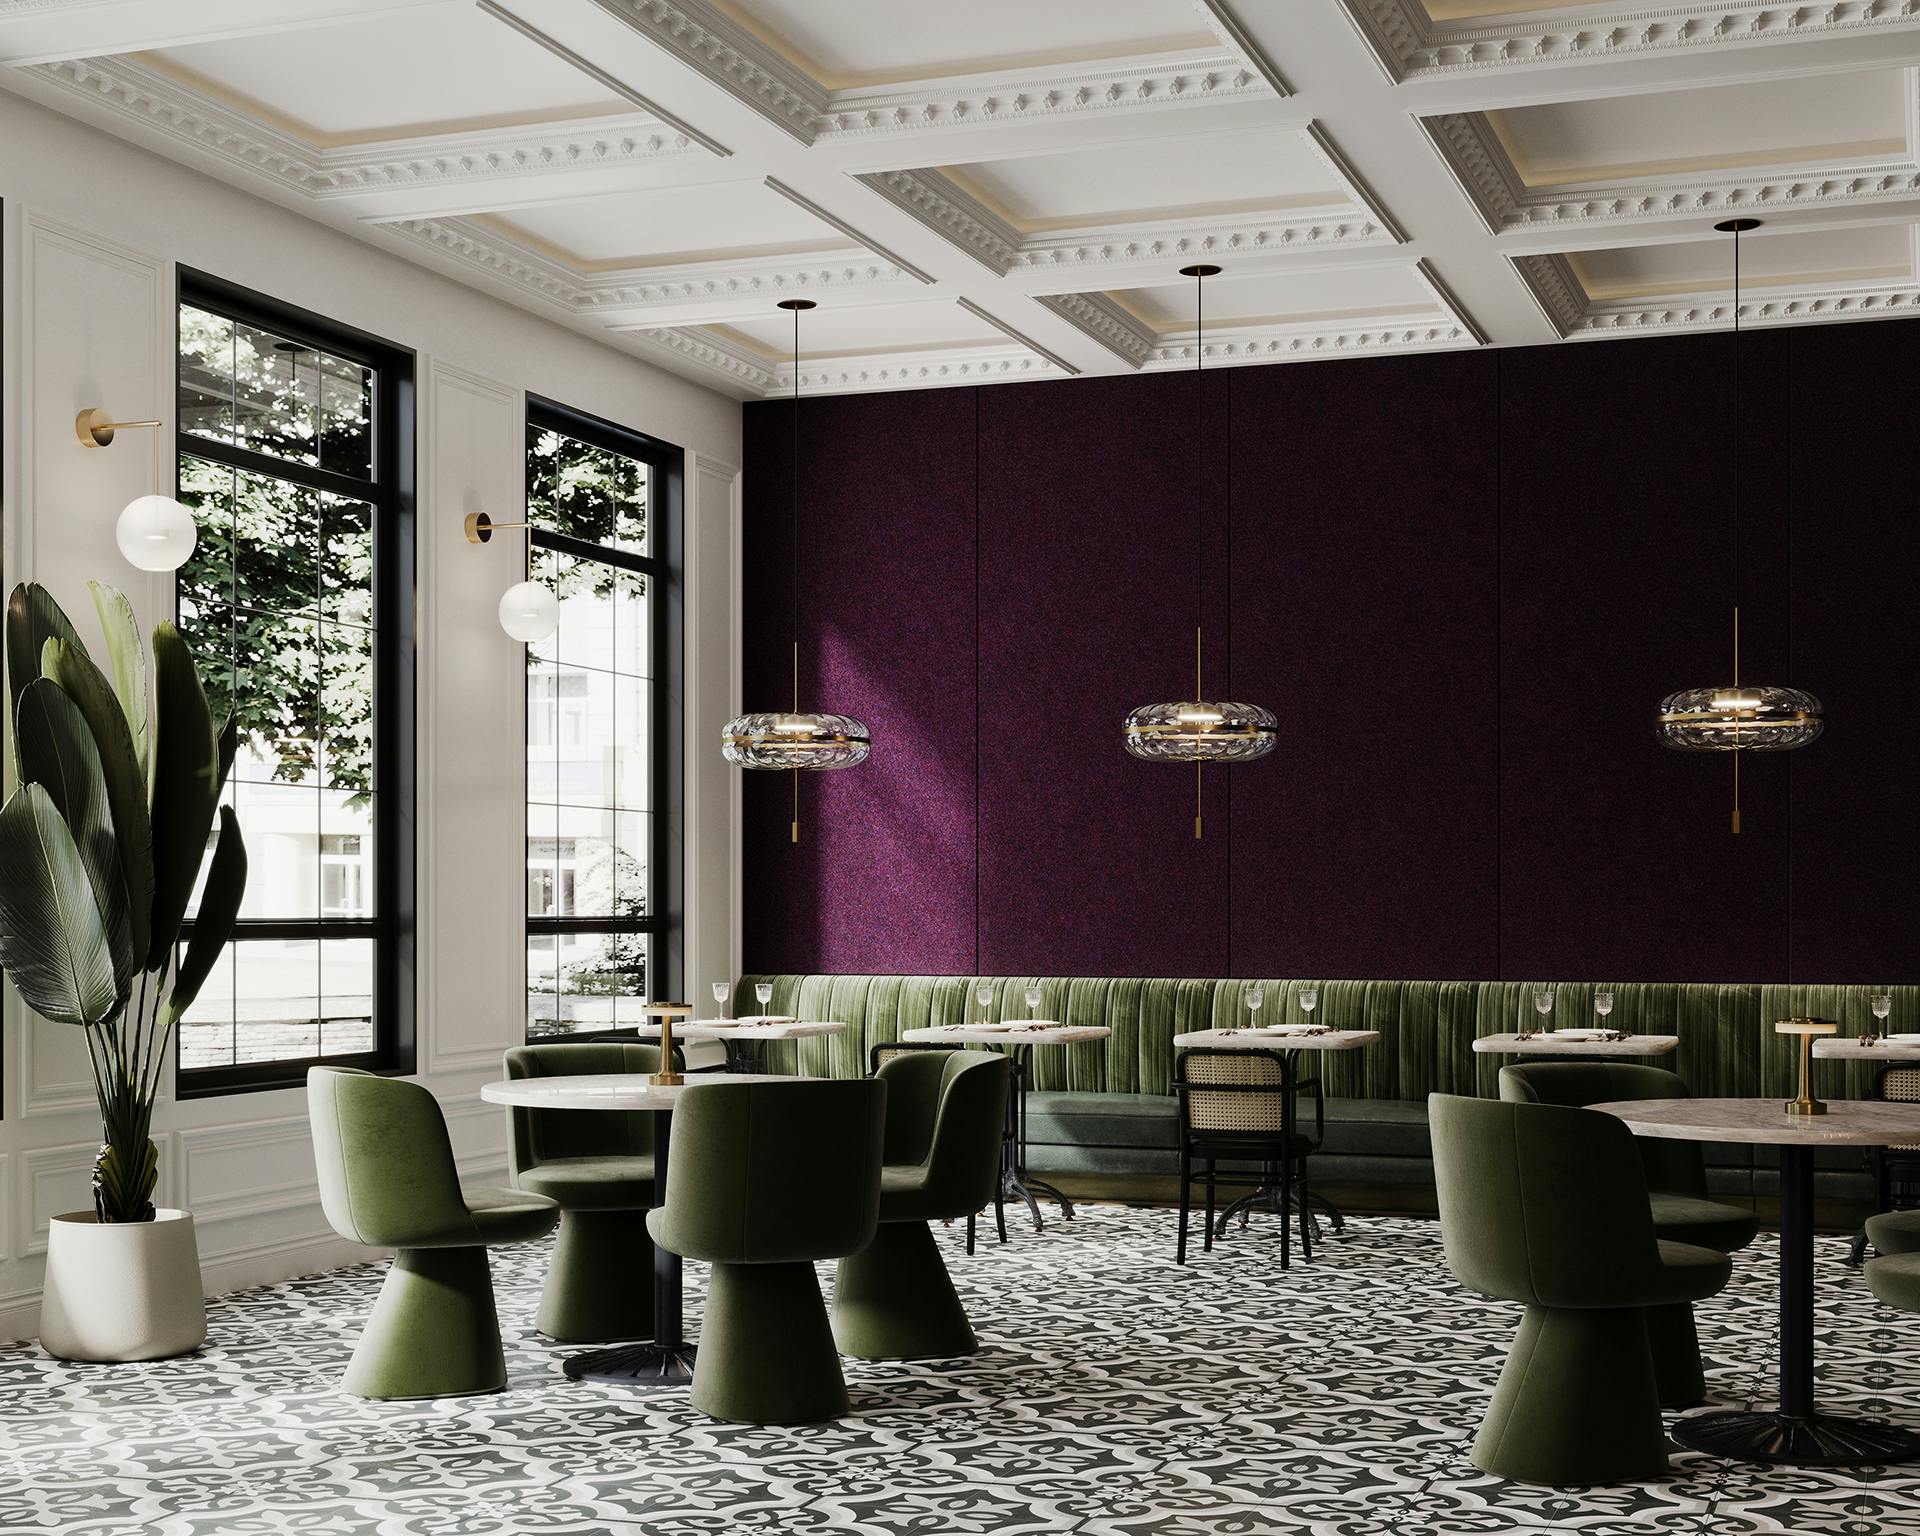 A chic and modern restaurant interior. It features green velvet chairs and an elegant green banquette seating against a dark shiraz acoustic felt paneled wall. The space is illuminated by hanging pendant lights and natural light streaming through large windows. The floor showcases a stylish black and white patterned tile.